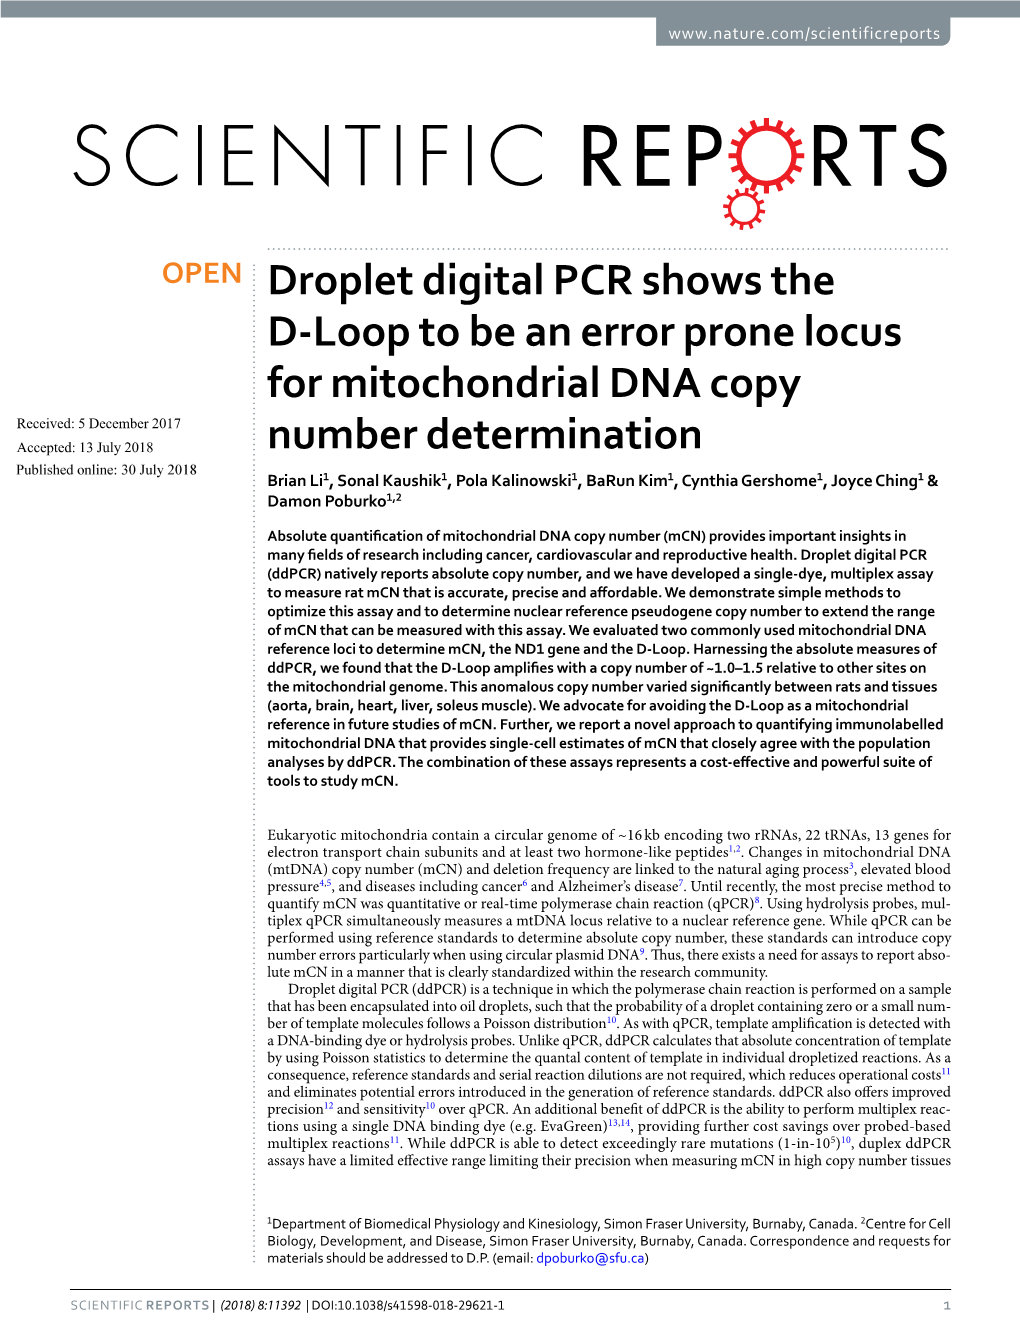 Droplet Digital PCR Shows the D-Loop to Be an Error Prone Locus